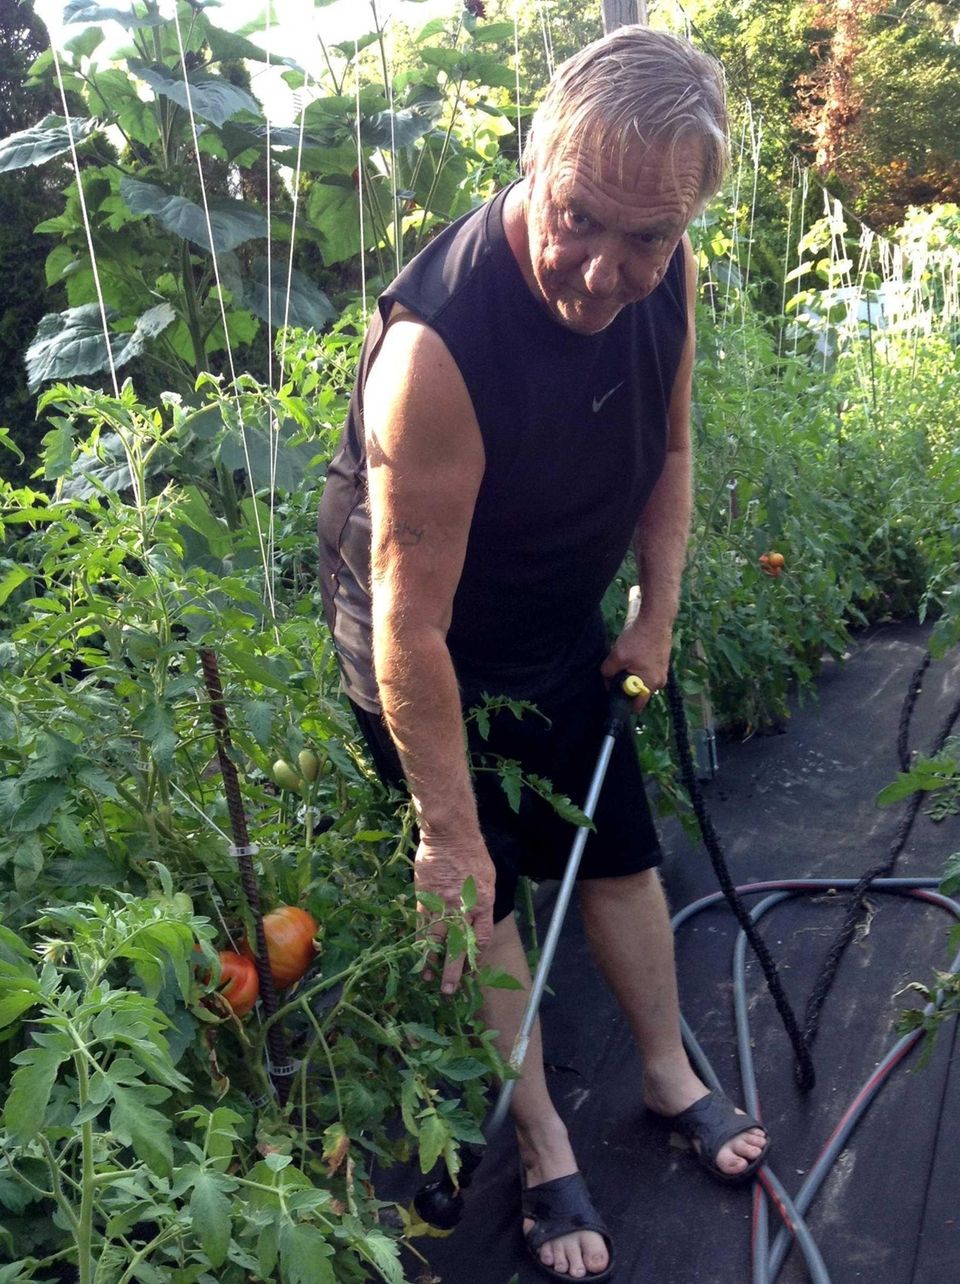 Bill McLaughlin has been growing tomatoes for 40